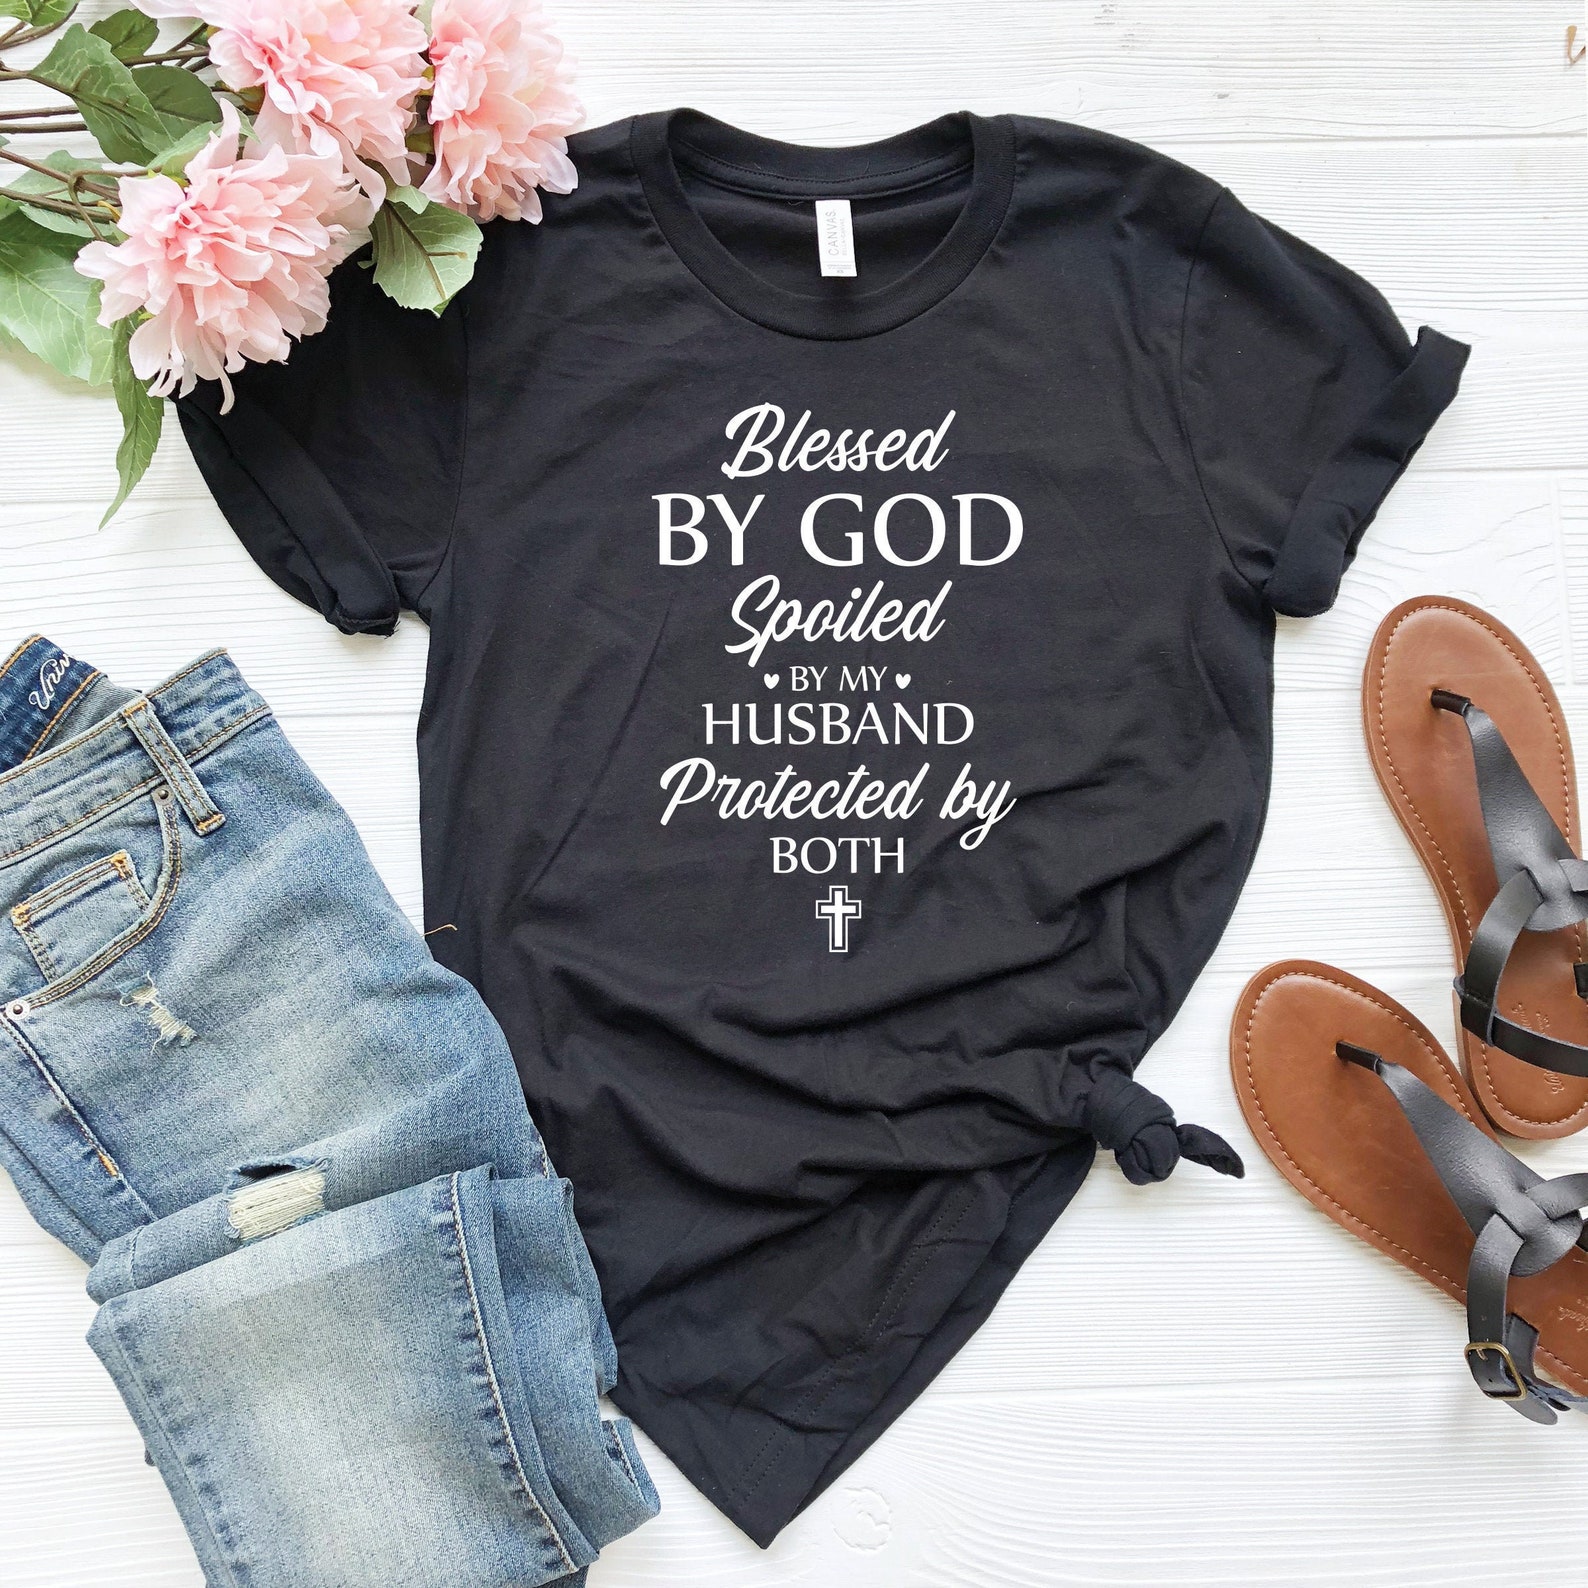 Blessed By God Spoiled By My Husband Protected By Both Shirt | Etsy